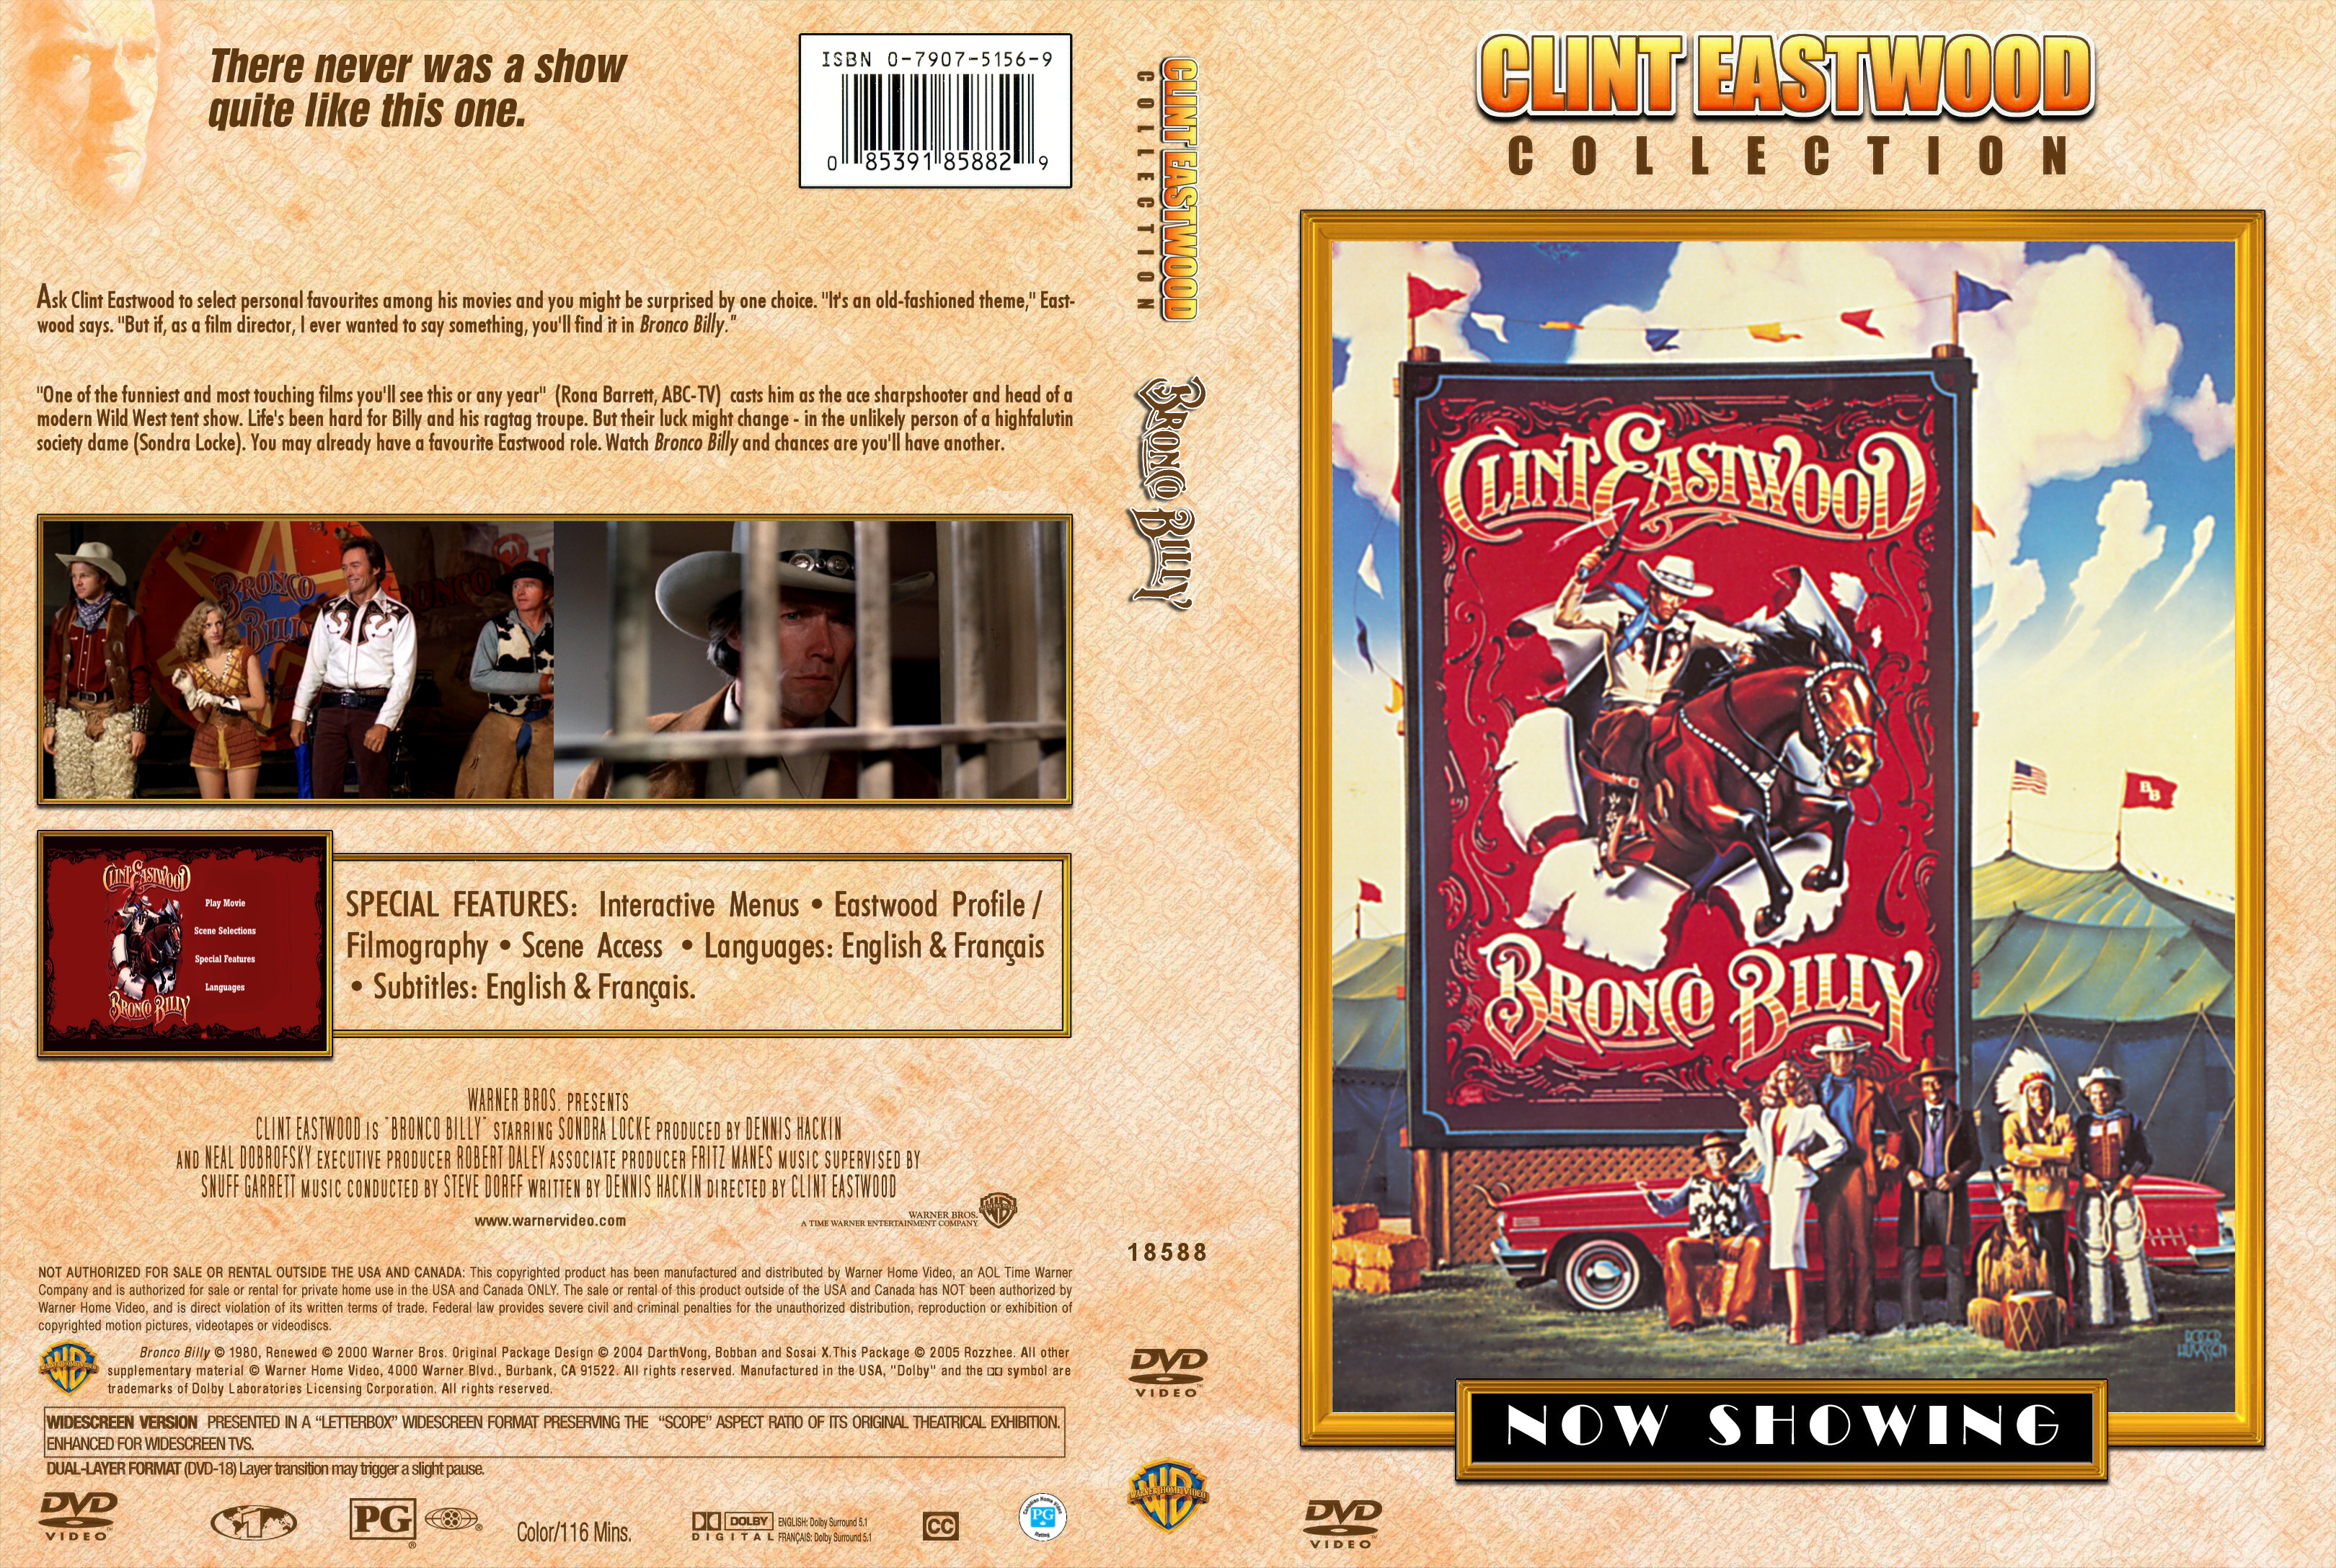 CLINT EASTWOOD COLLECTION - BRONCO BILLY